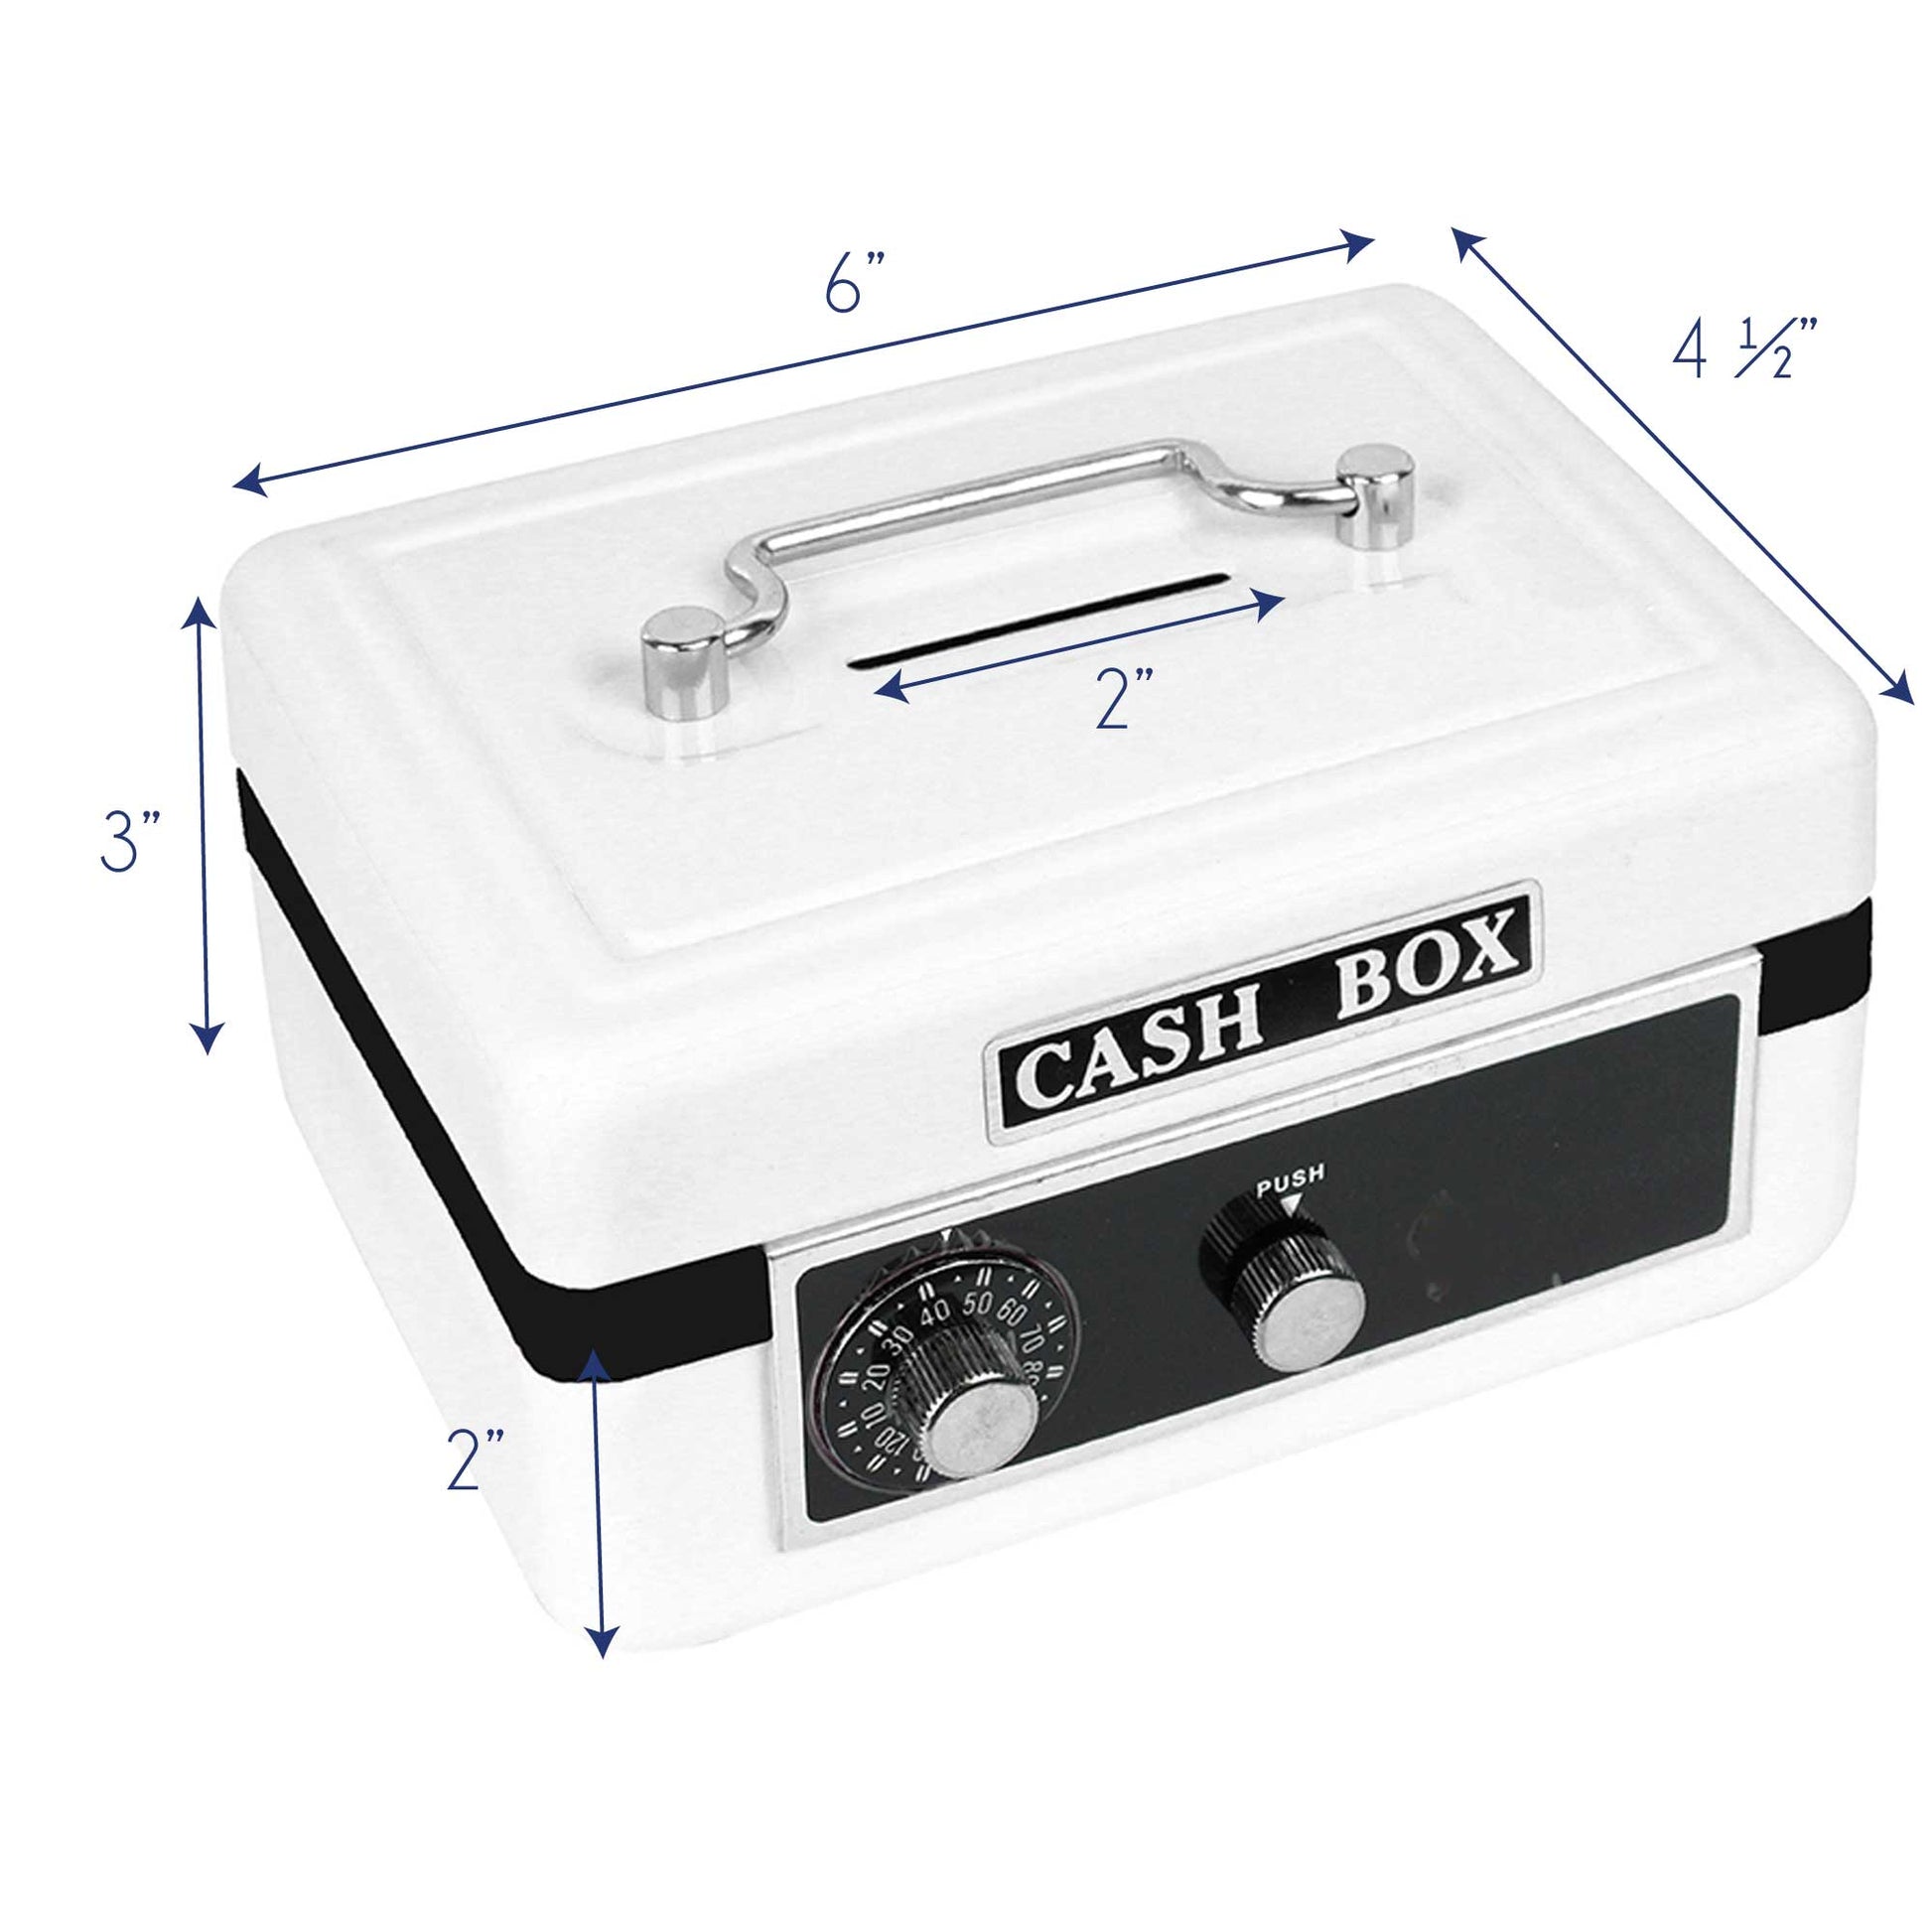 Personalized White Cash Box with Blue Tractor design